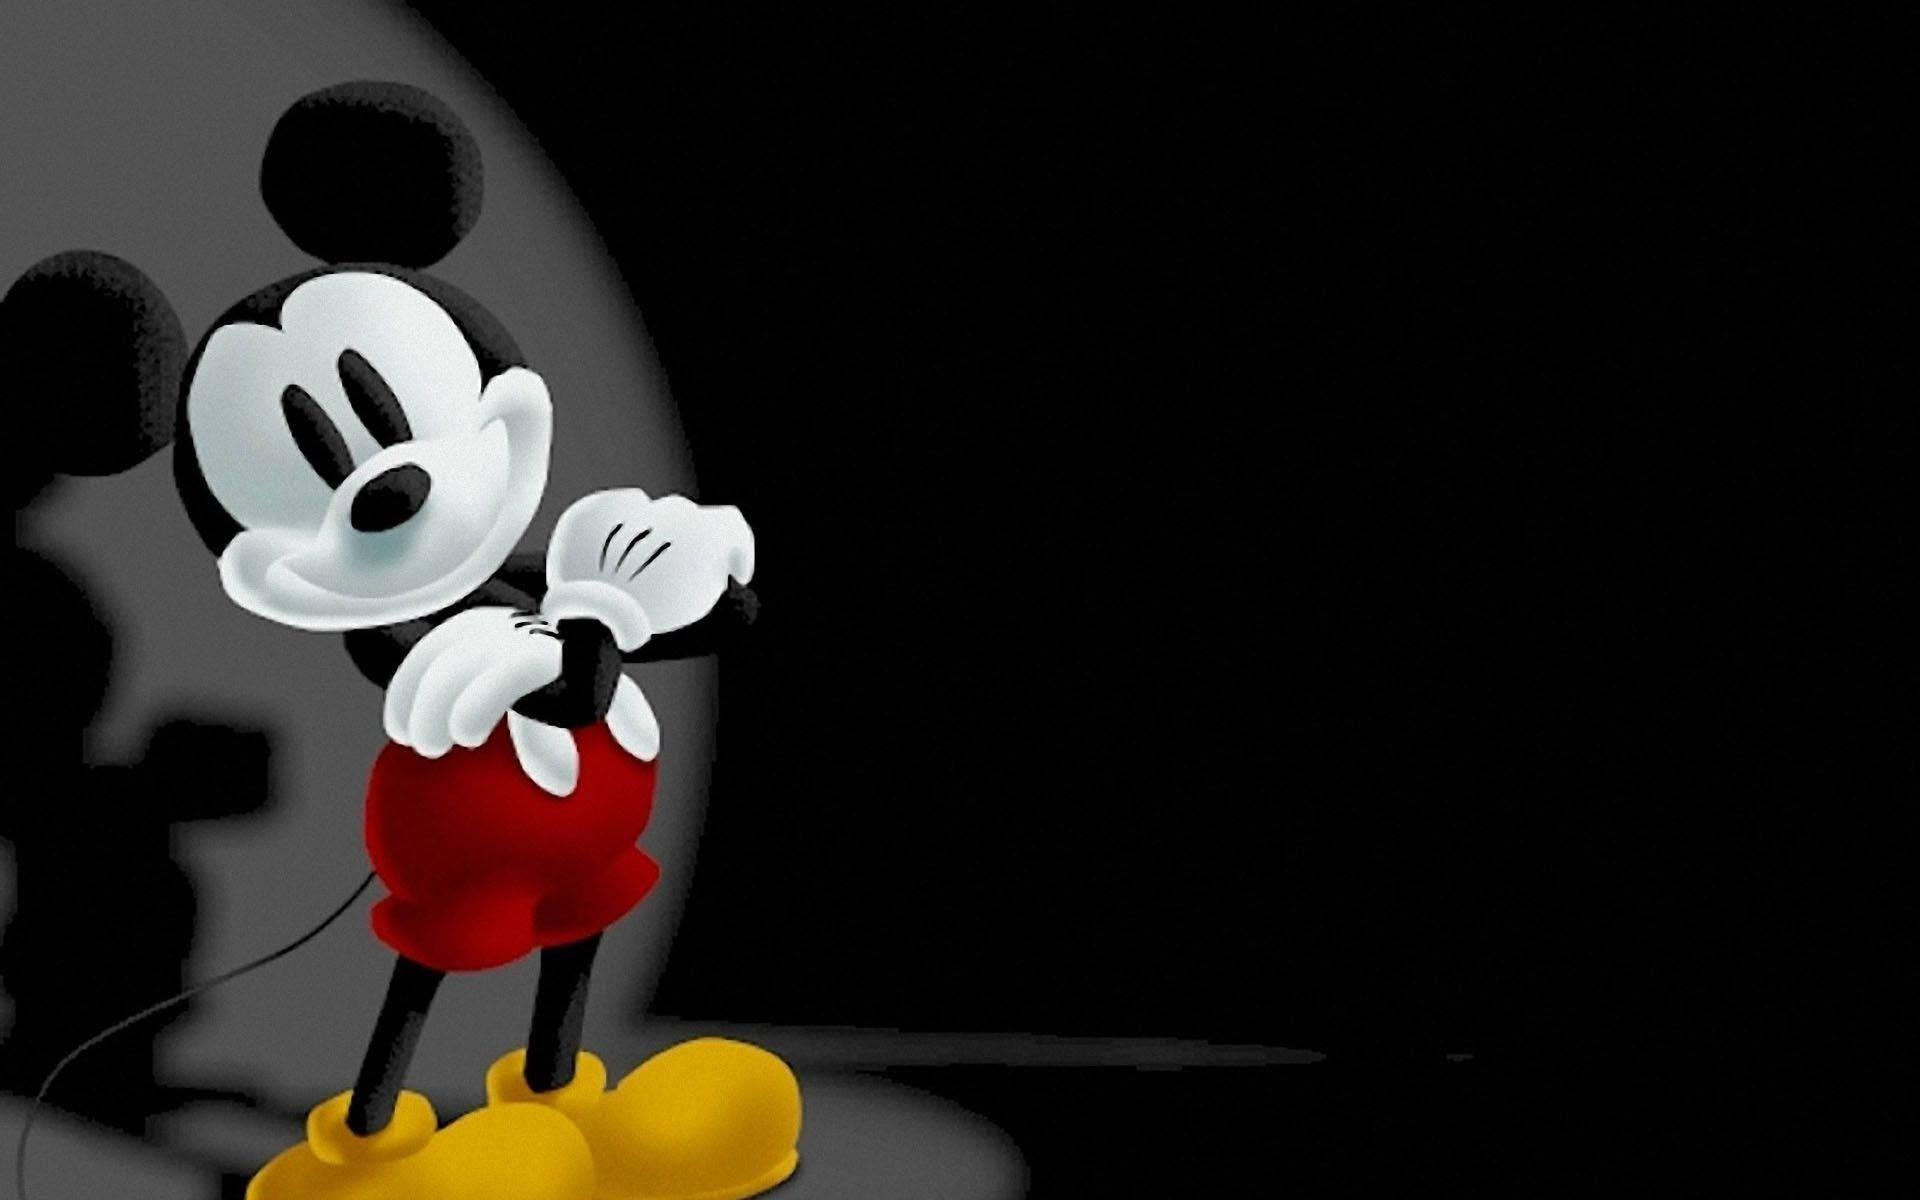 Disney Mickey Mouse Desktop Wallpapers - Top Free Disney Mickey Mouse ...